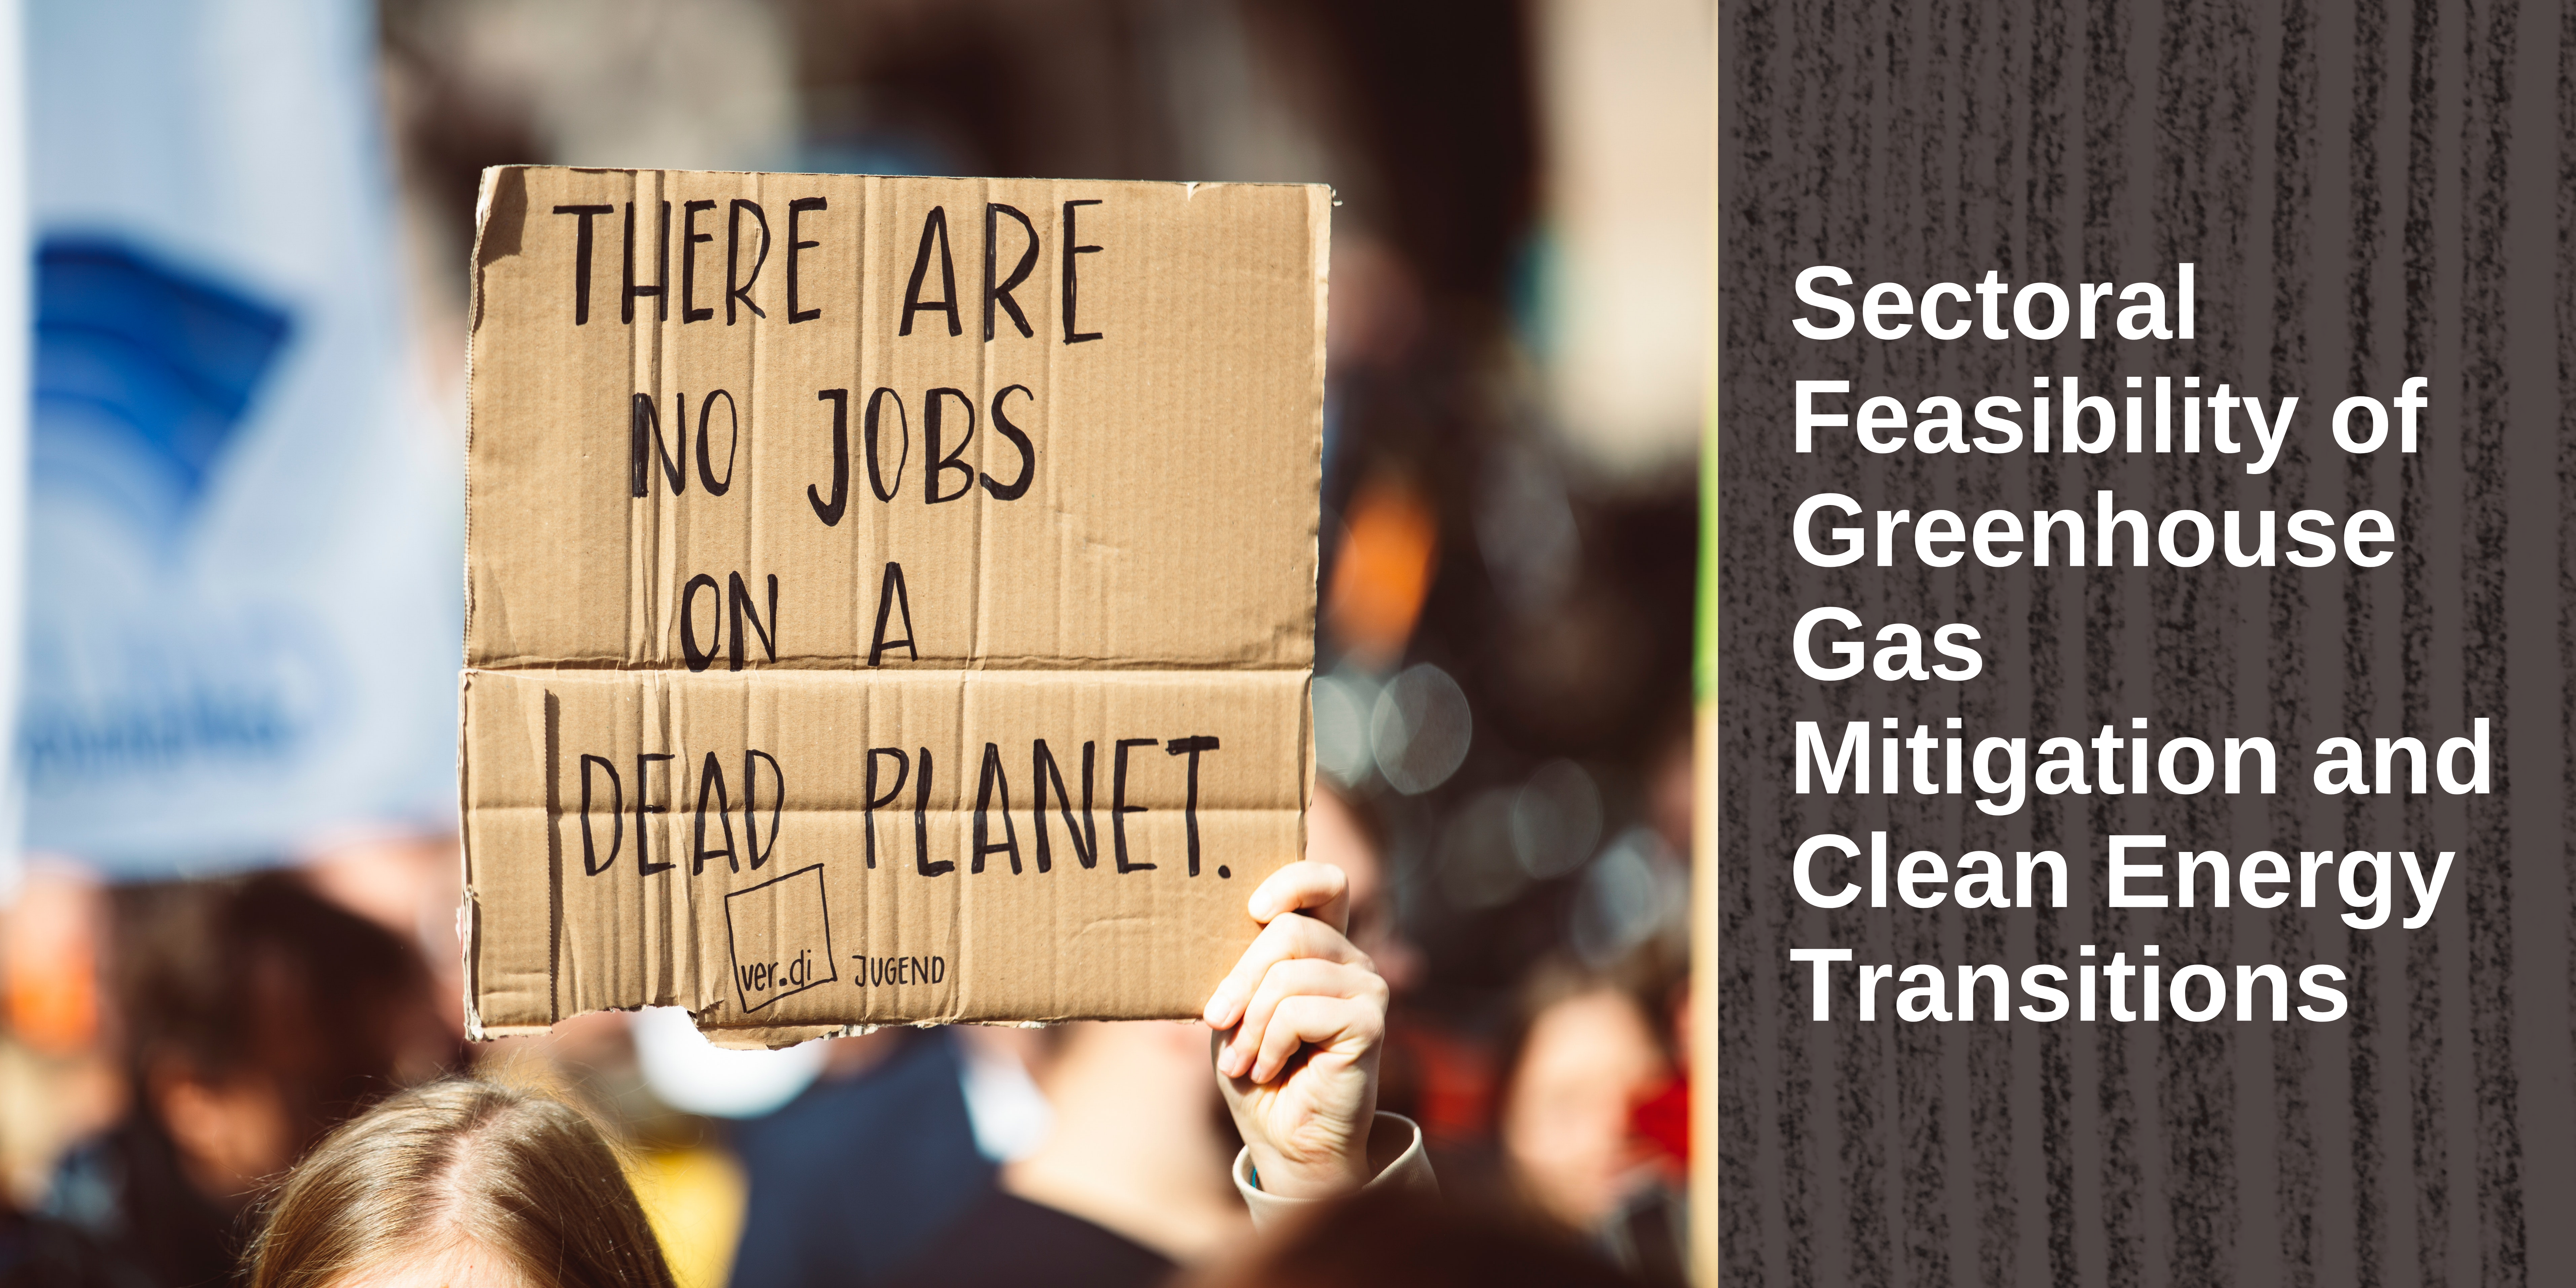 Protest Sign: There are no jobs on a dead planet with title - Sectoral Feasibility of Greenhouse Gas Mitigation and Clean Energy Transitions